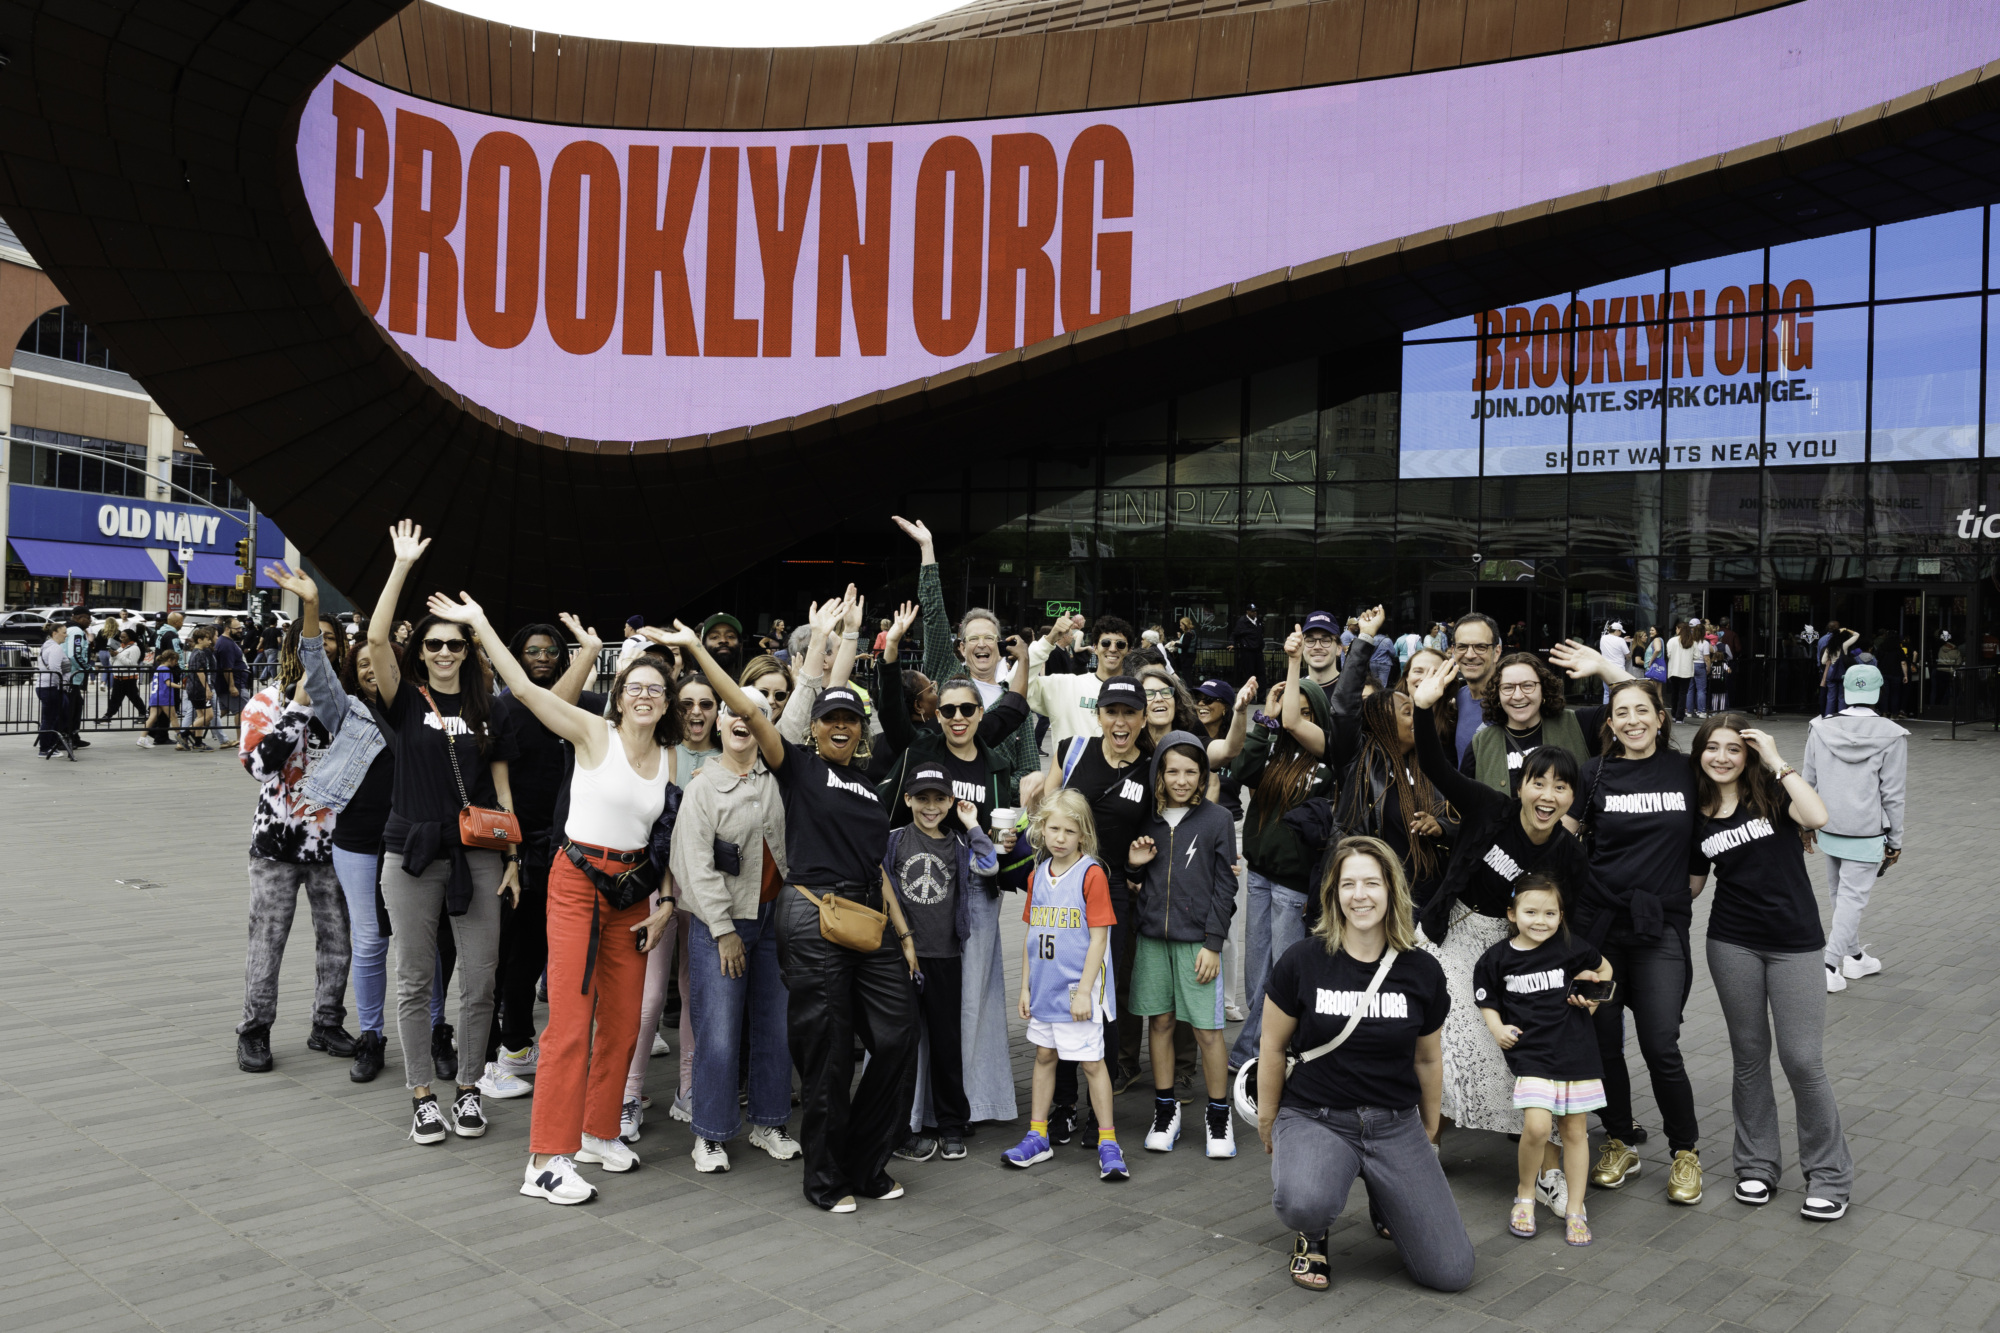 A diverse group of people smiling and posing with hands raised in front of an entrance with a large "BROOKLYN.ORG" sign.